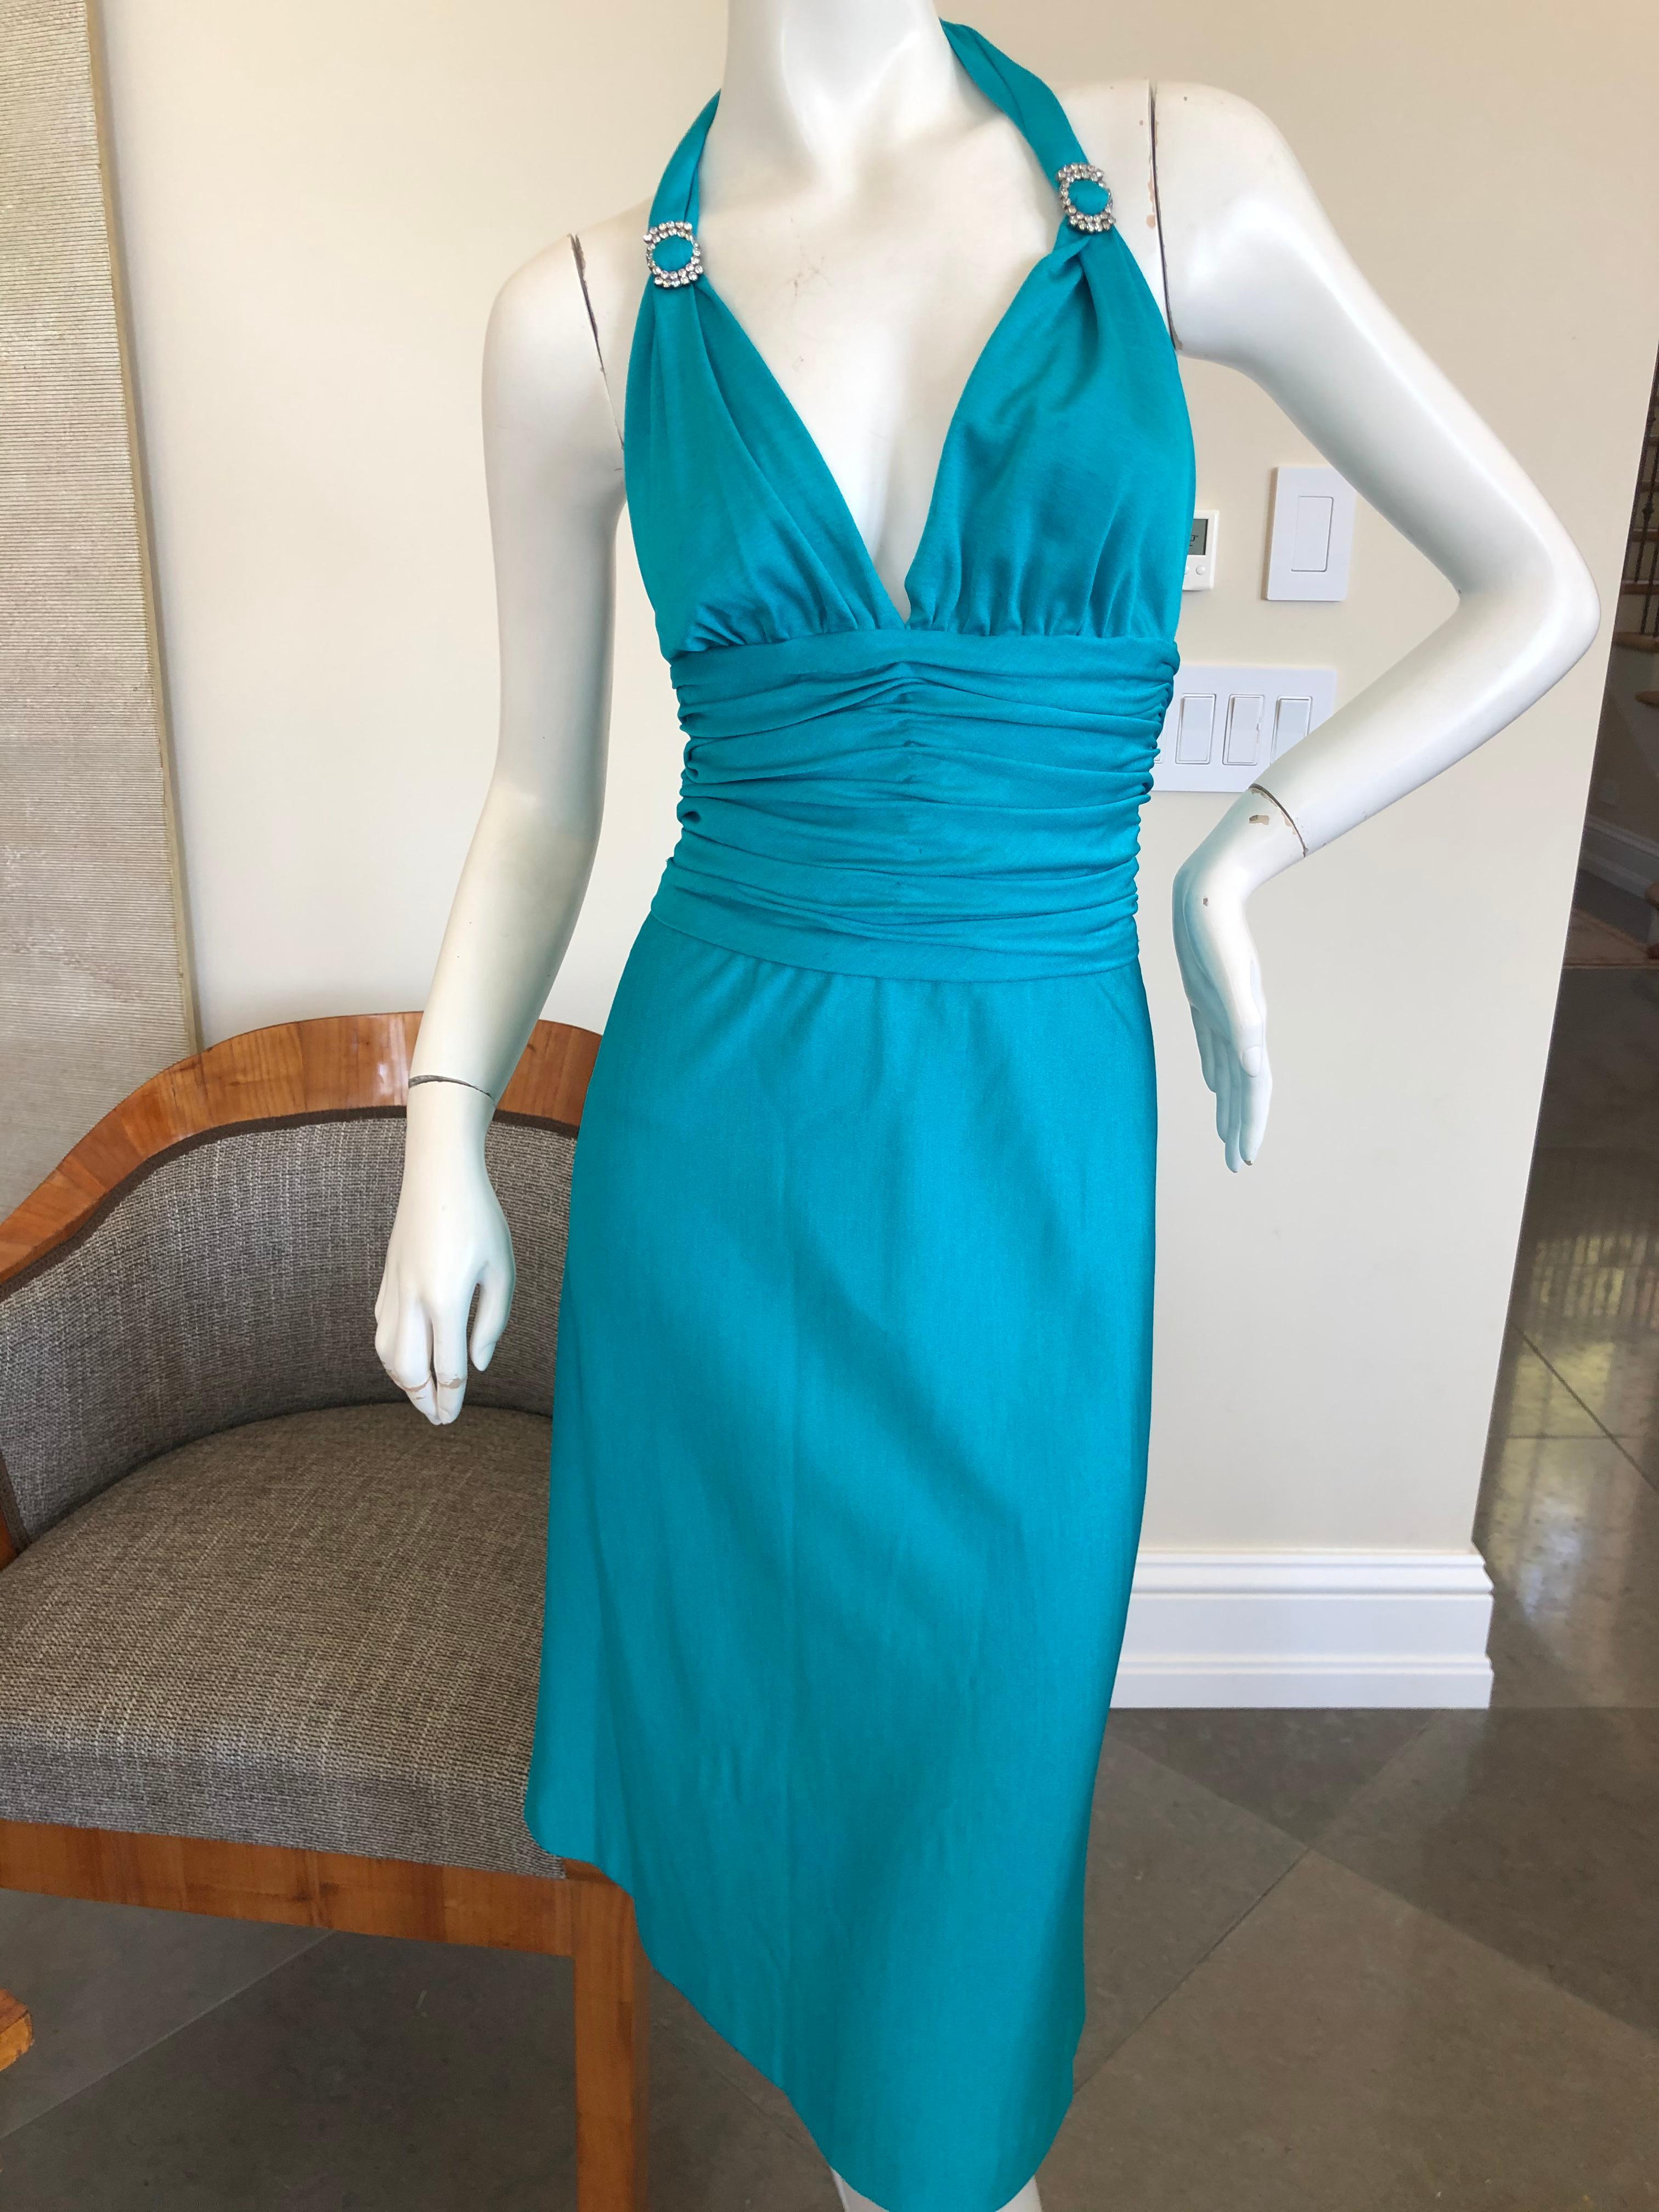 Loris Azzaro Couture 70's Low Cut Blue Cocktail Dress with Crystal Accents For Sale 2